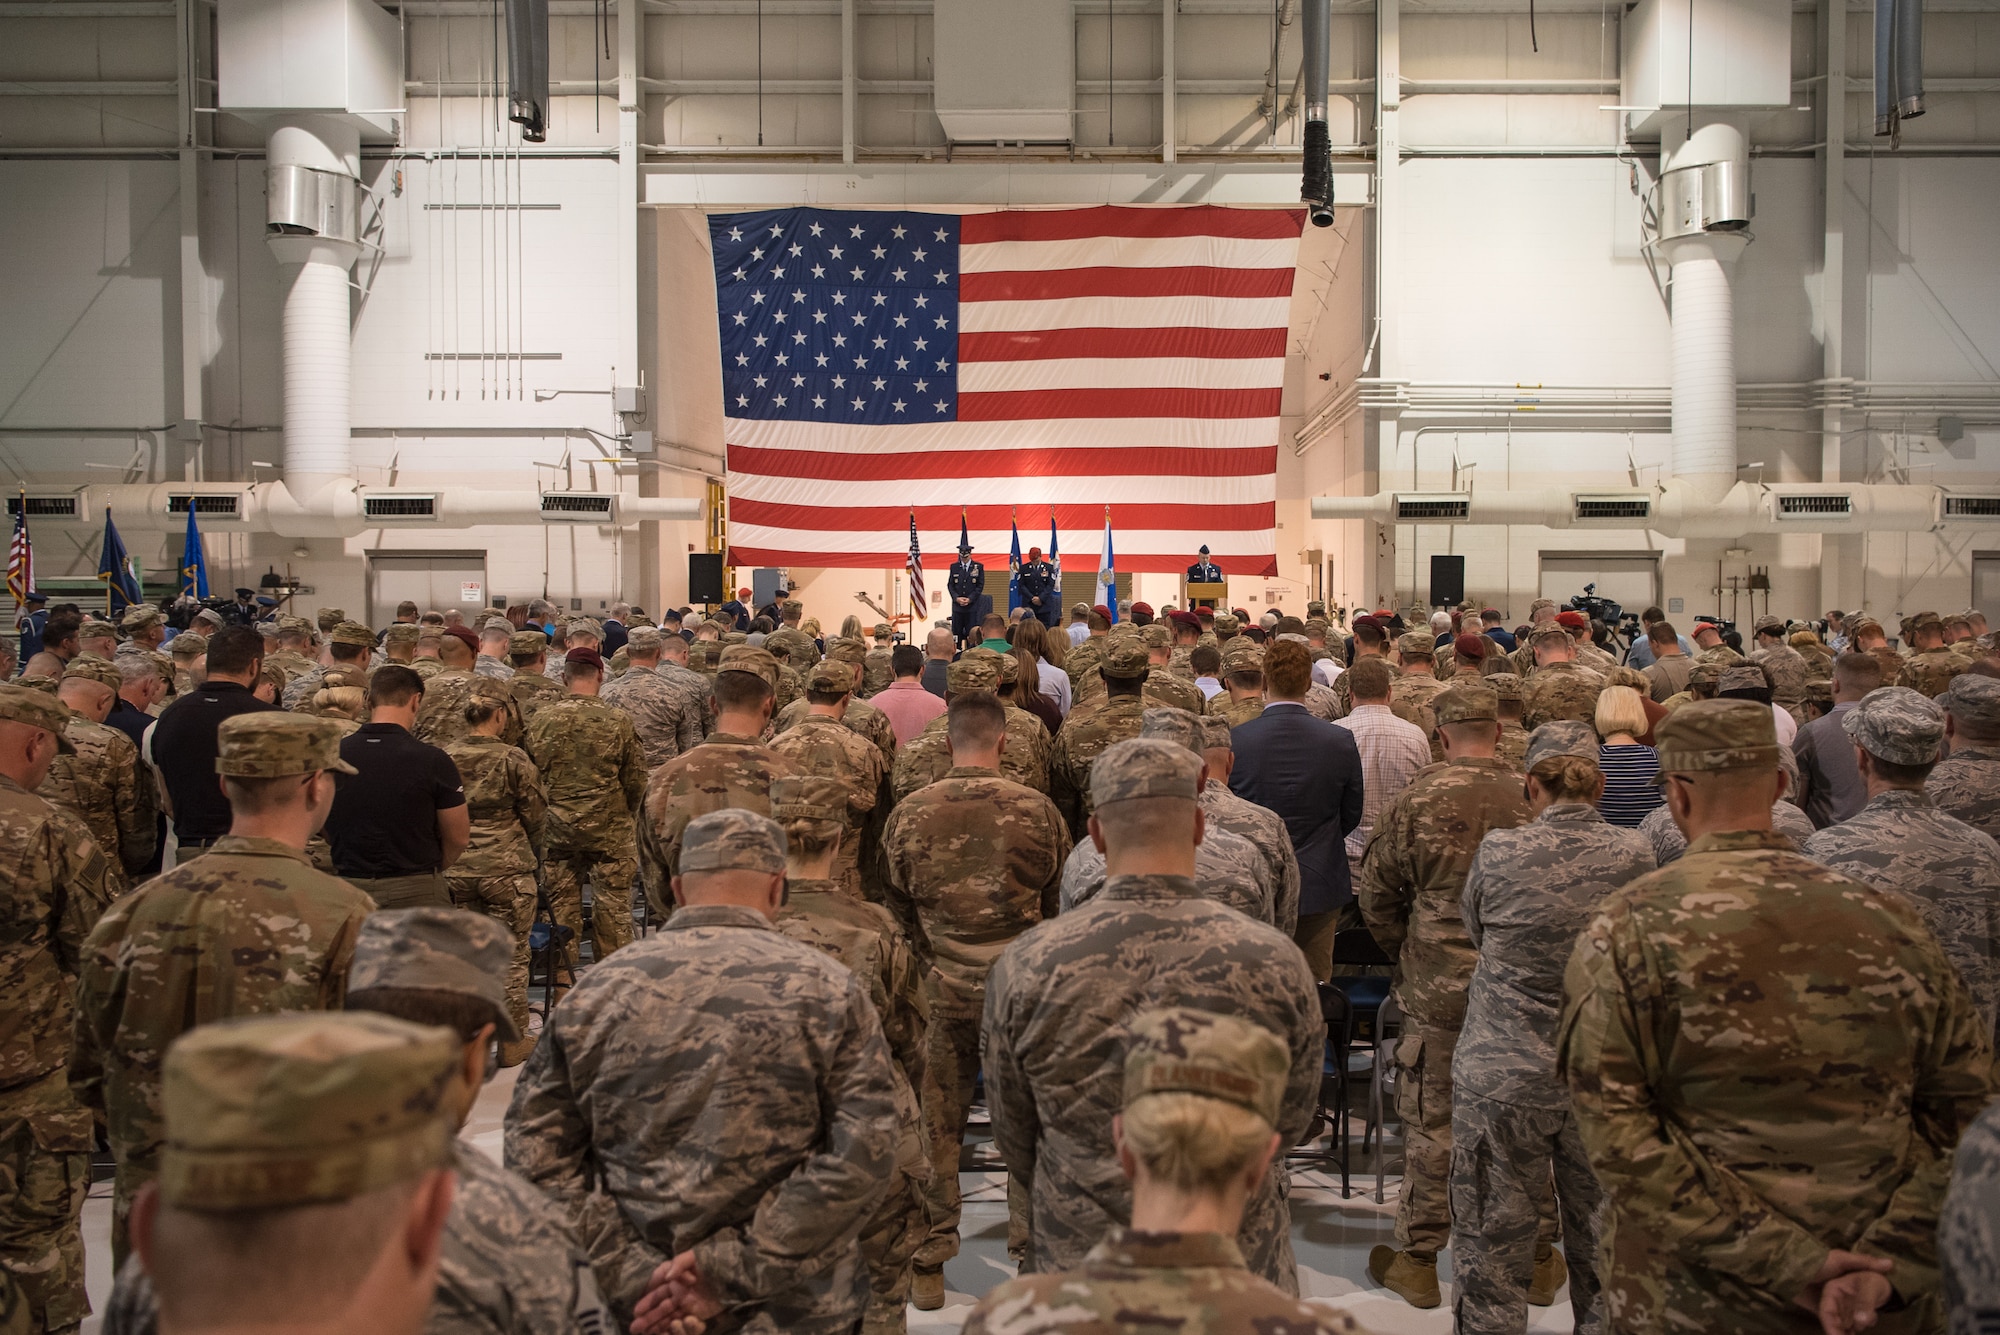 More than 400 Airmen and family members attend an award ceremony at the Kentucky Air National Guard Base in Louisville, Ky, Aug.13, 2019, to bestow the Air Force Cross on Tech. Sgt. Daniel Keller, a combat controller in the 123rd Special Tactics Squadron. Keller earned the award — second only to the Medal of Honor — for valor on the battlefield in Afghanistan. (U.S. Air National Guard photo by Staff Sgt. Joshua Horton)